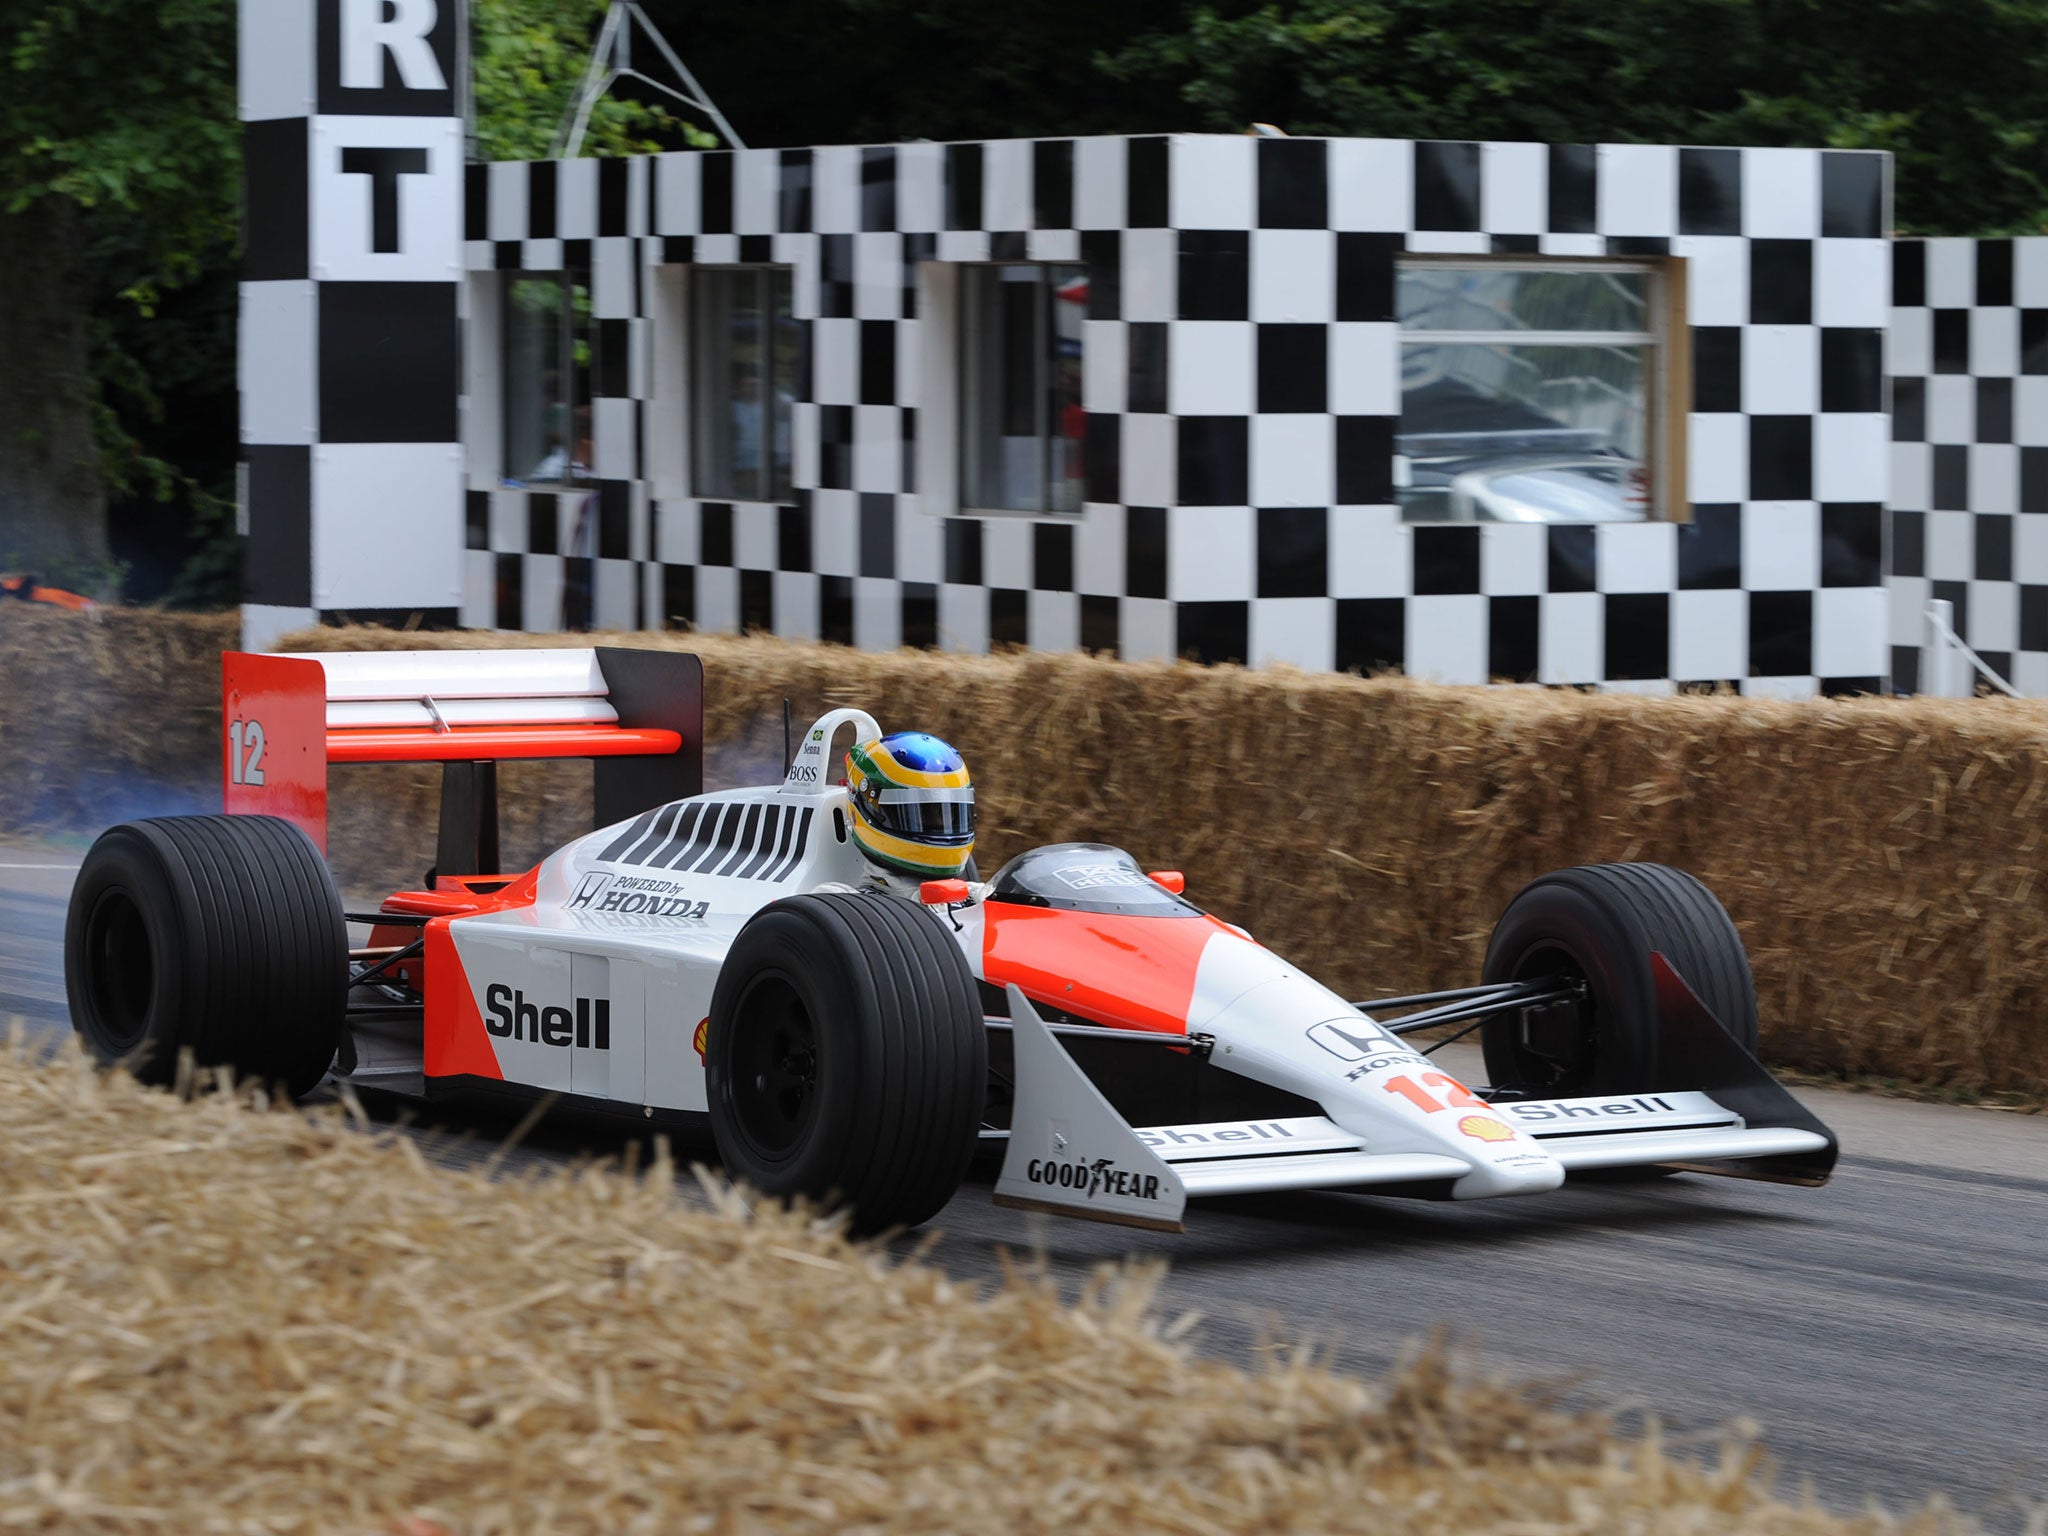 McLaren's reunion with Honda will be celebrated